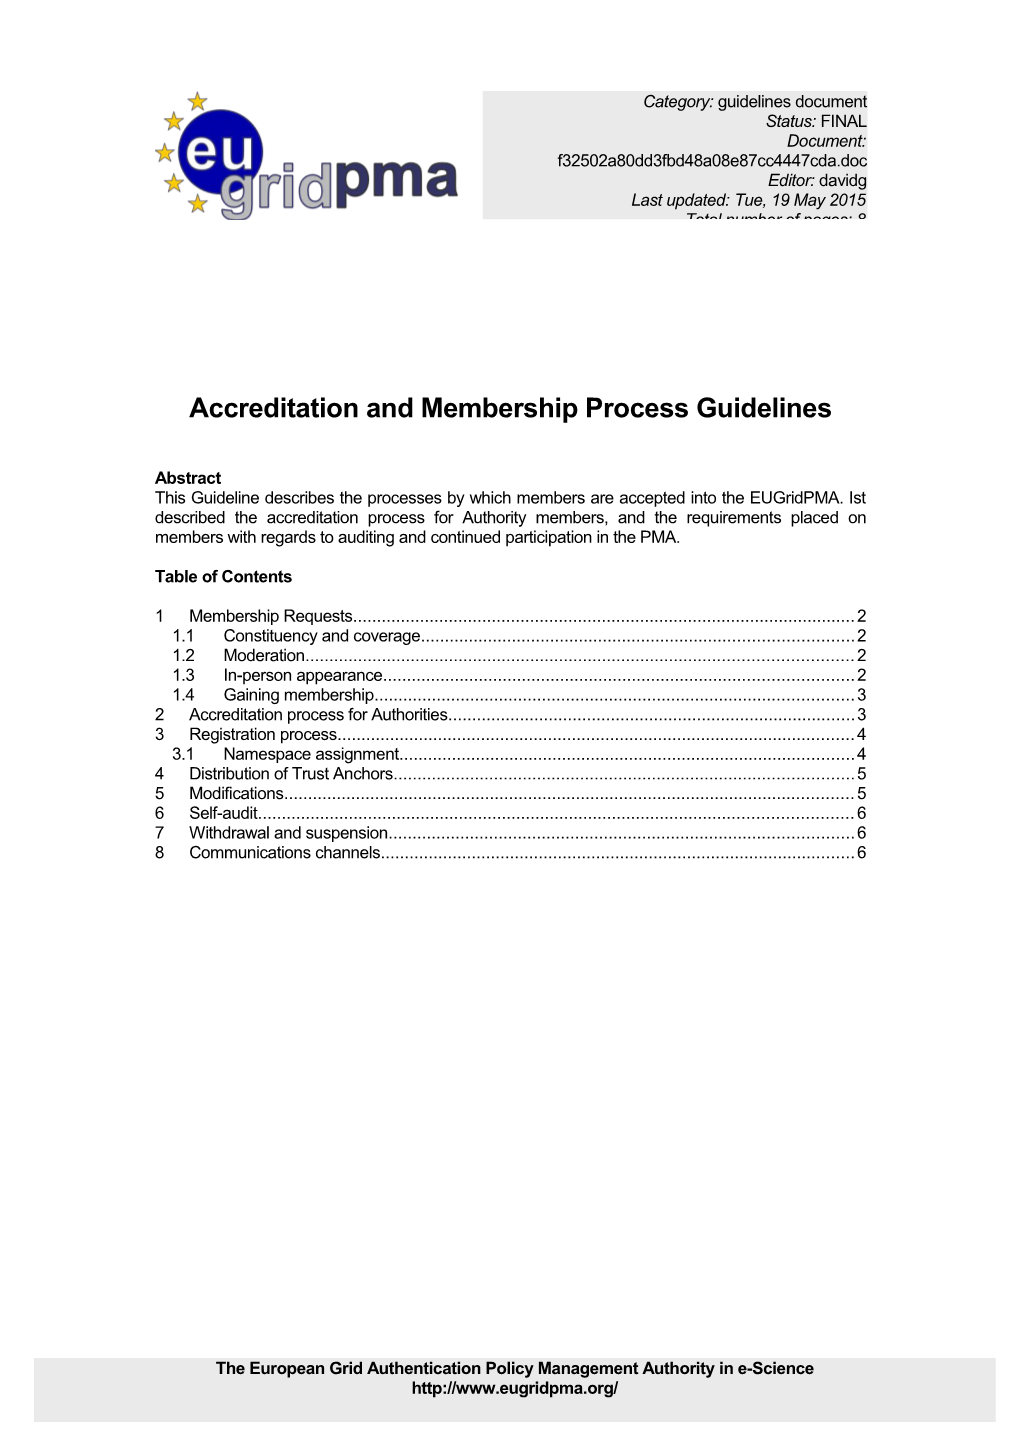 Accreditation and Membership Process Guidelines